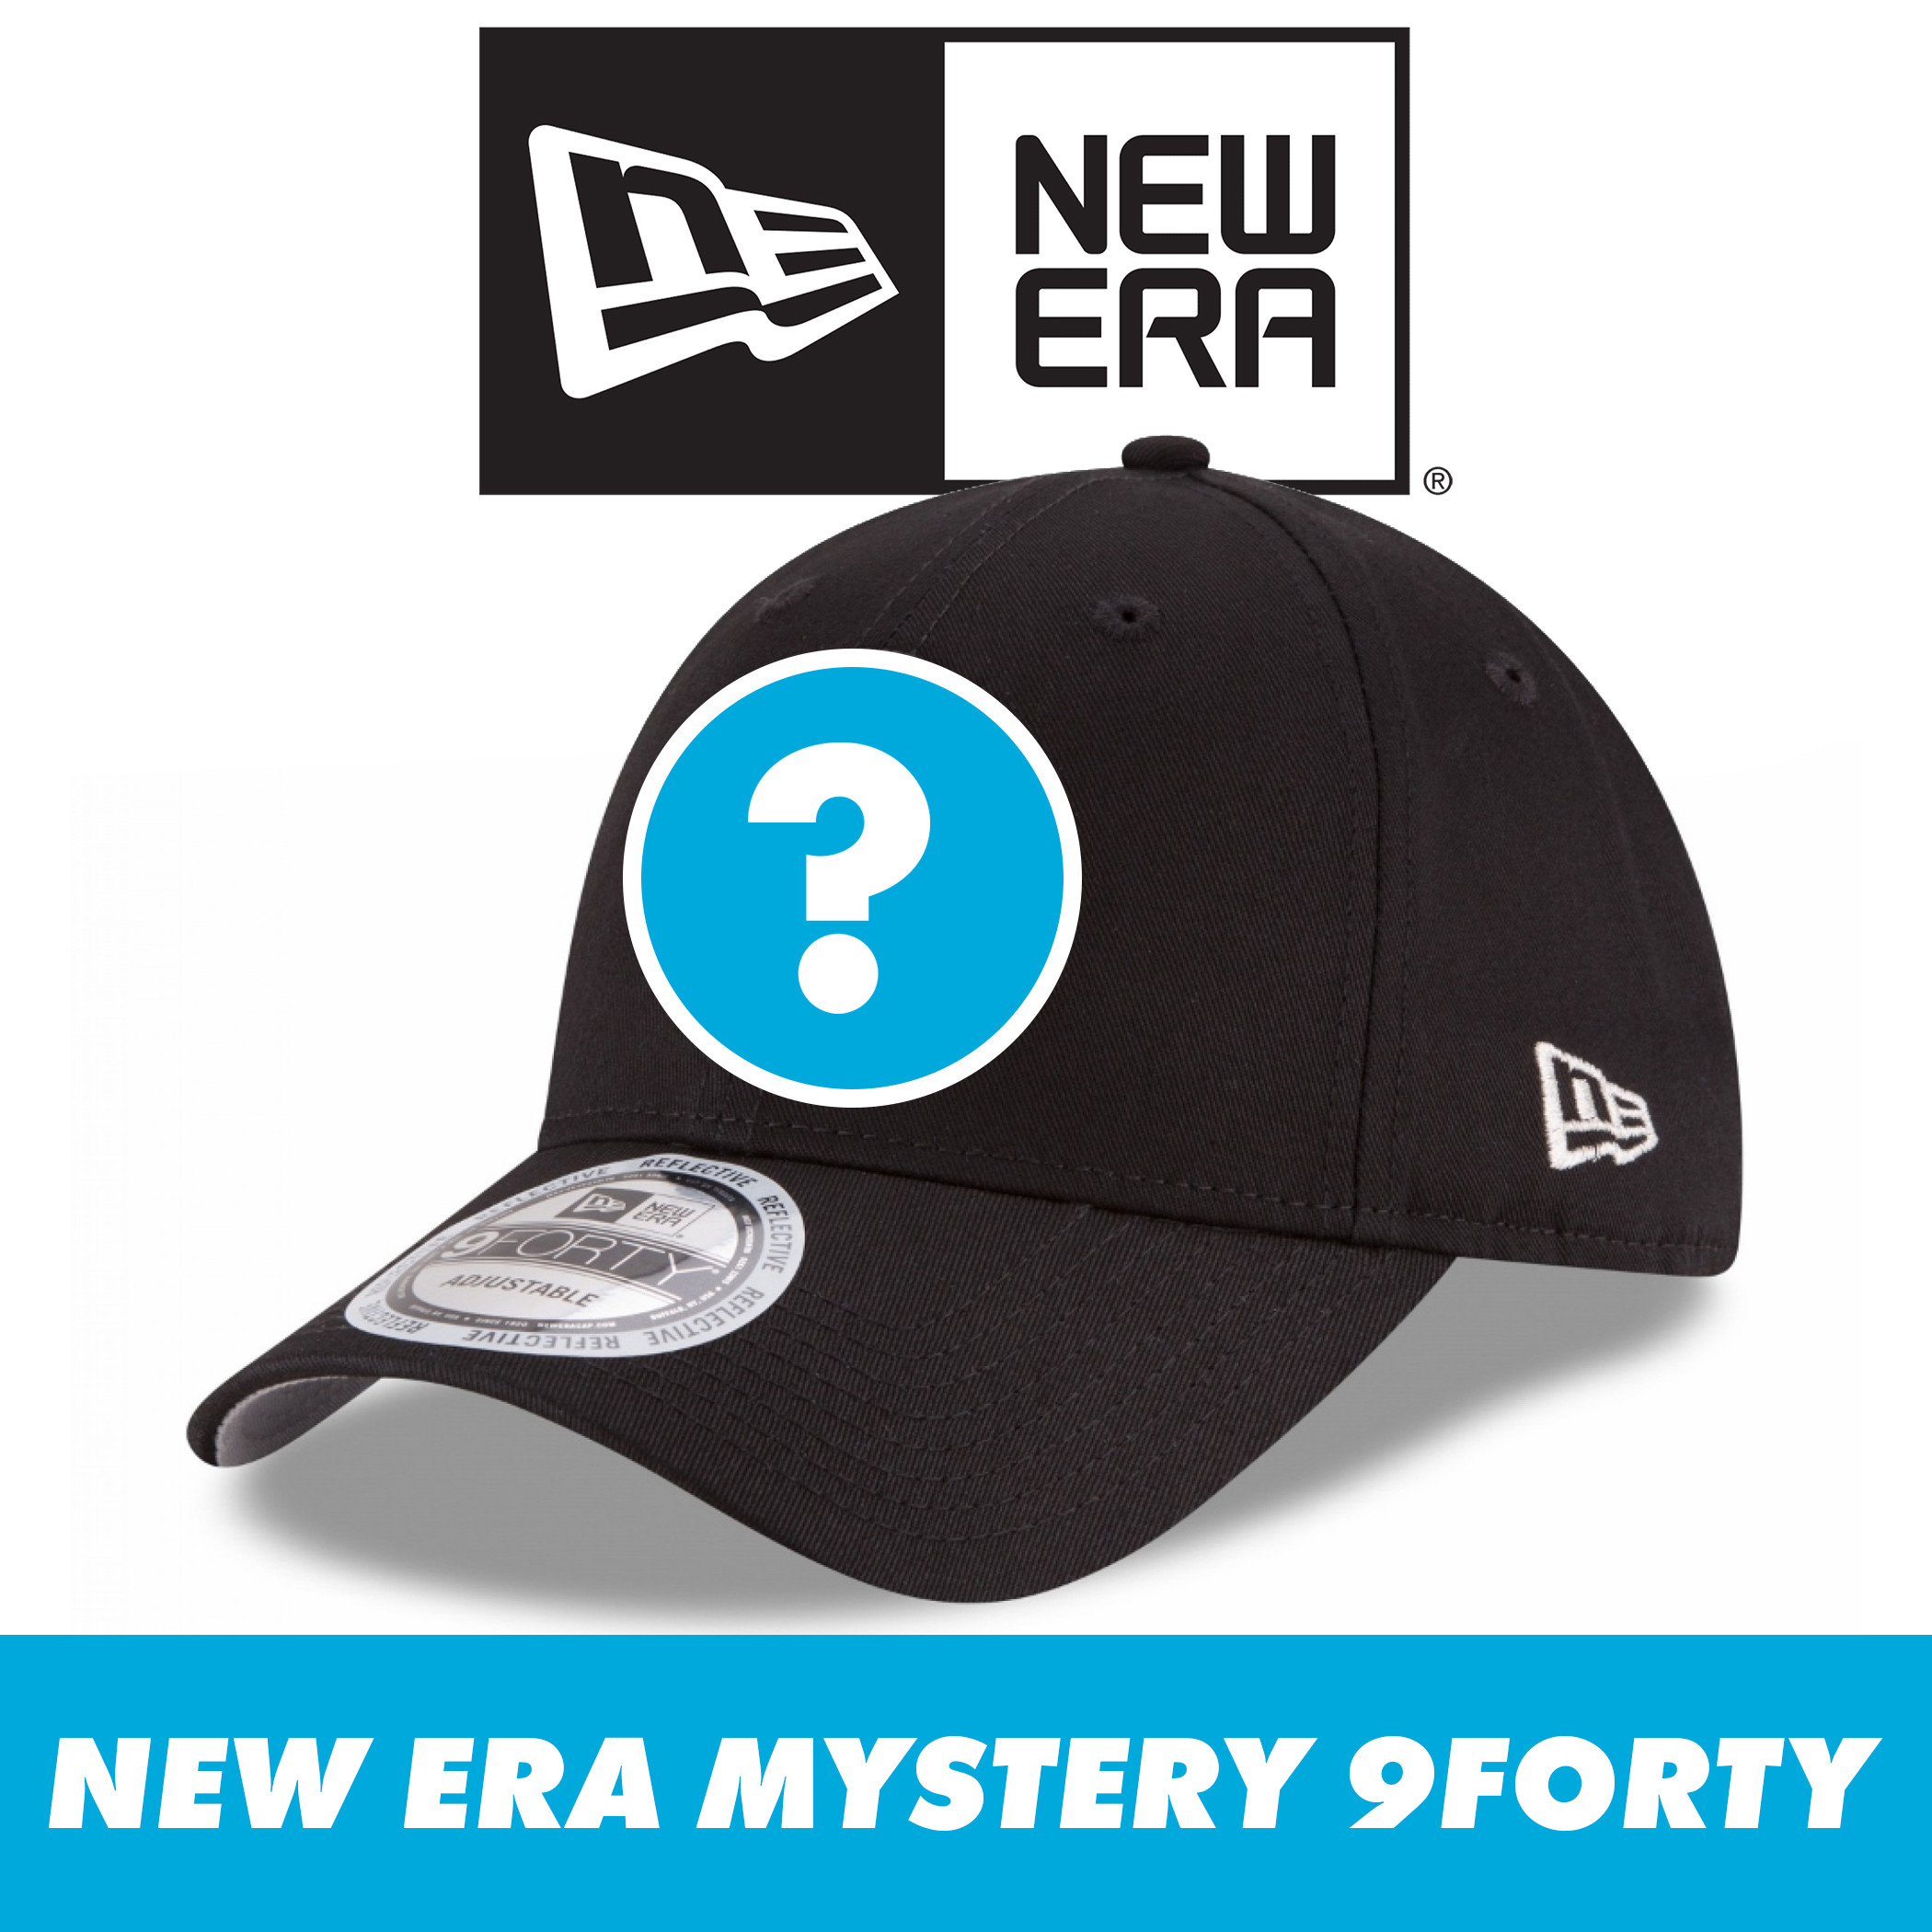 New Era Mystery 9Forty Adjustable Hat